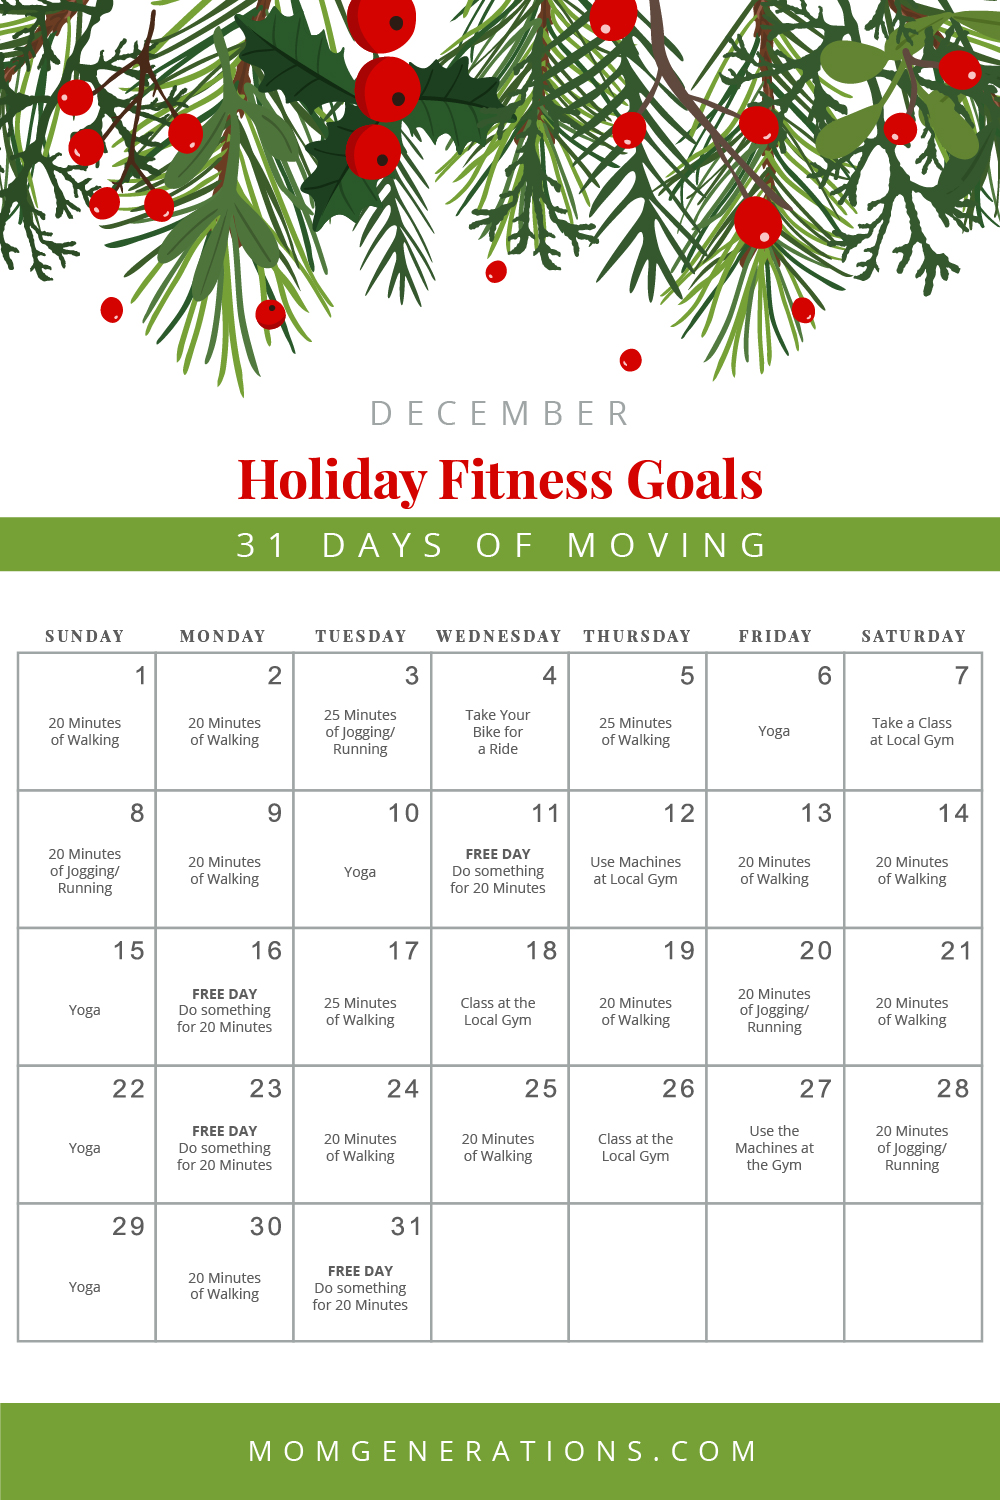 December Fitness Goals 31 Days of MOVING Stylish Life for Moms